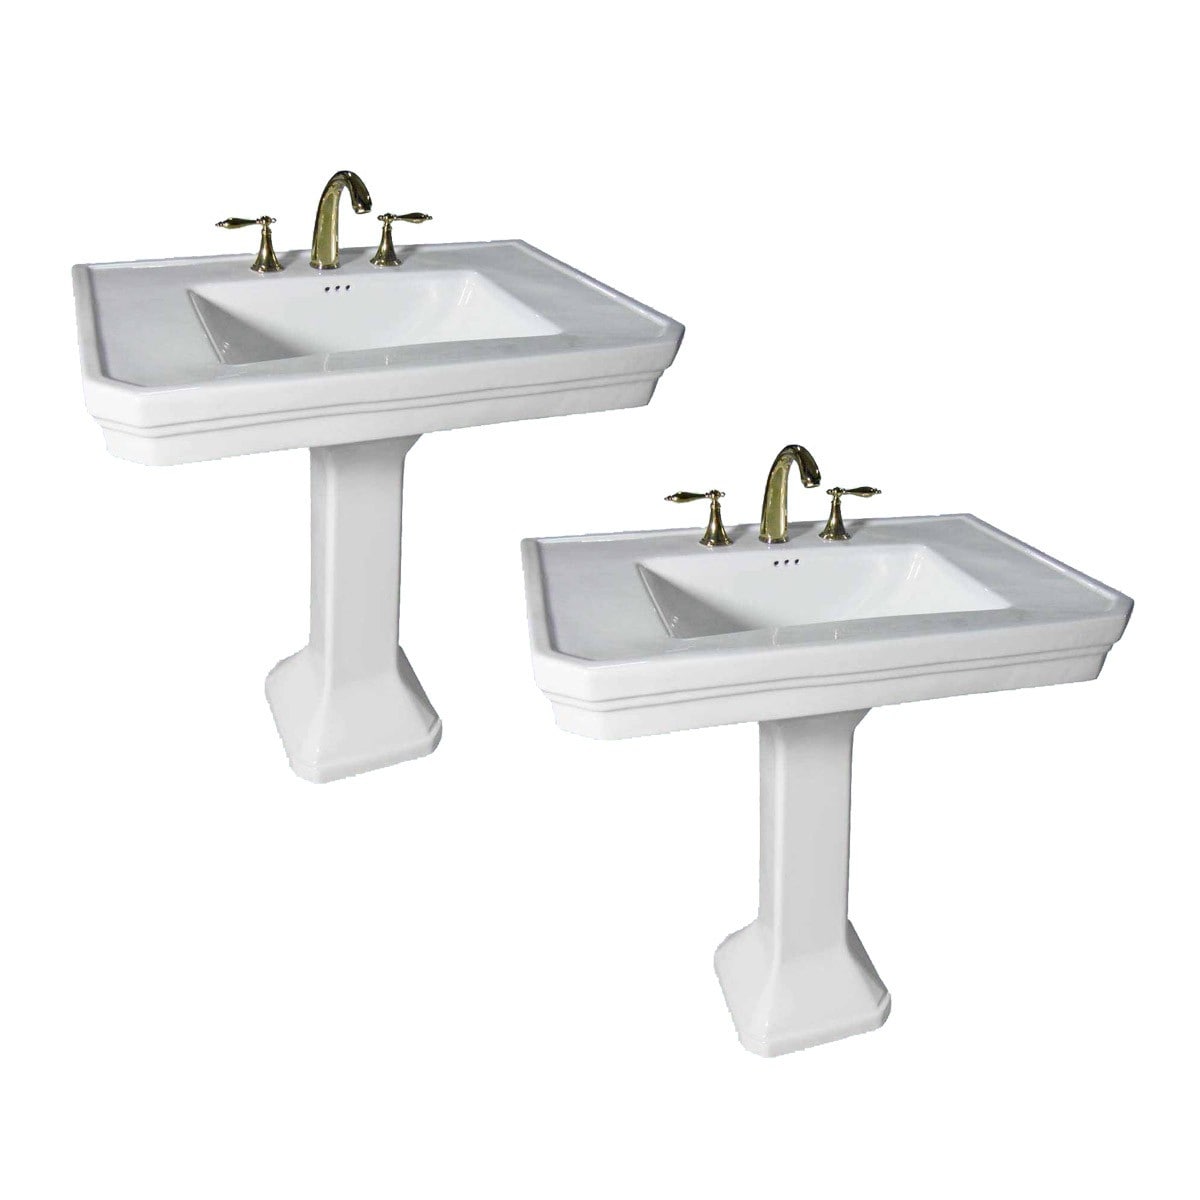 https://ak1.ostkcdn.com/images/products/is/images/direct/dd4ece95cd1a1a52b8eeb6e756ce891bcda50dca/Renovator%27s-Supply-Large-White-Pedestal-Sink-8-inch-Widespread-Set-of-2.jpg